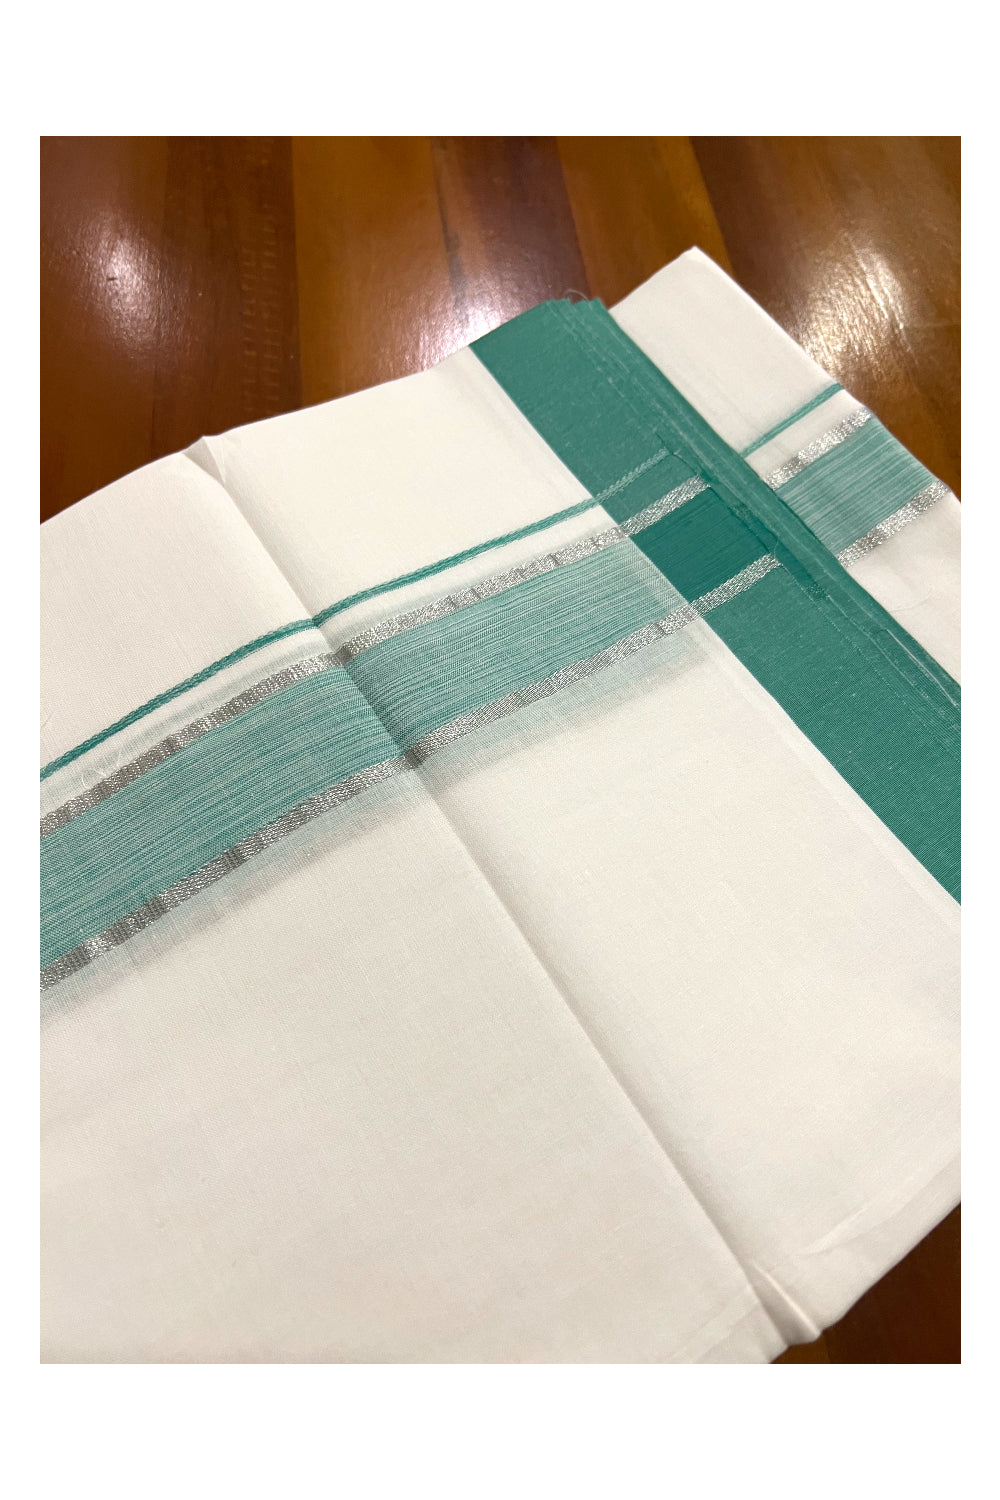 Pure White Cotton Double Mundu with Light Green and Silver Kasavu Border (South Indian Dhoti)